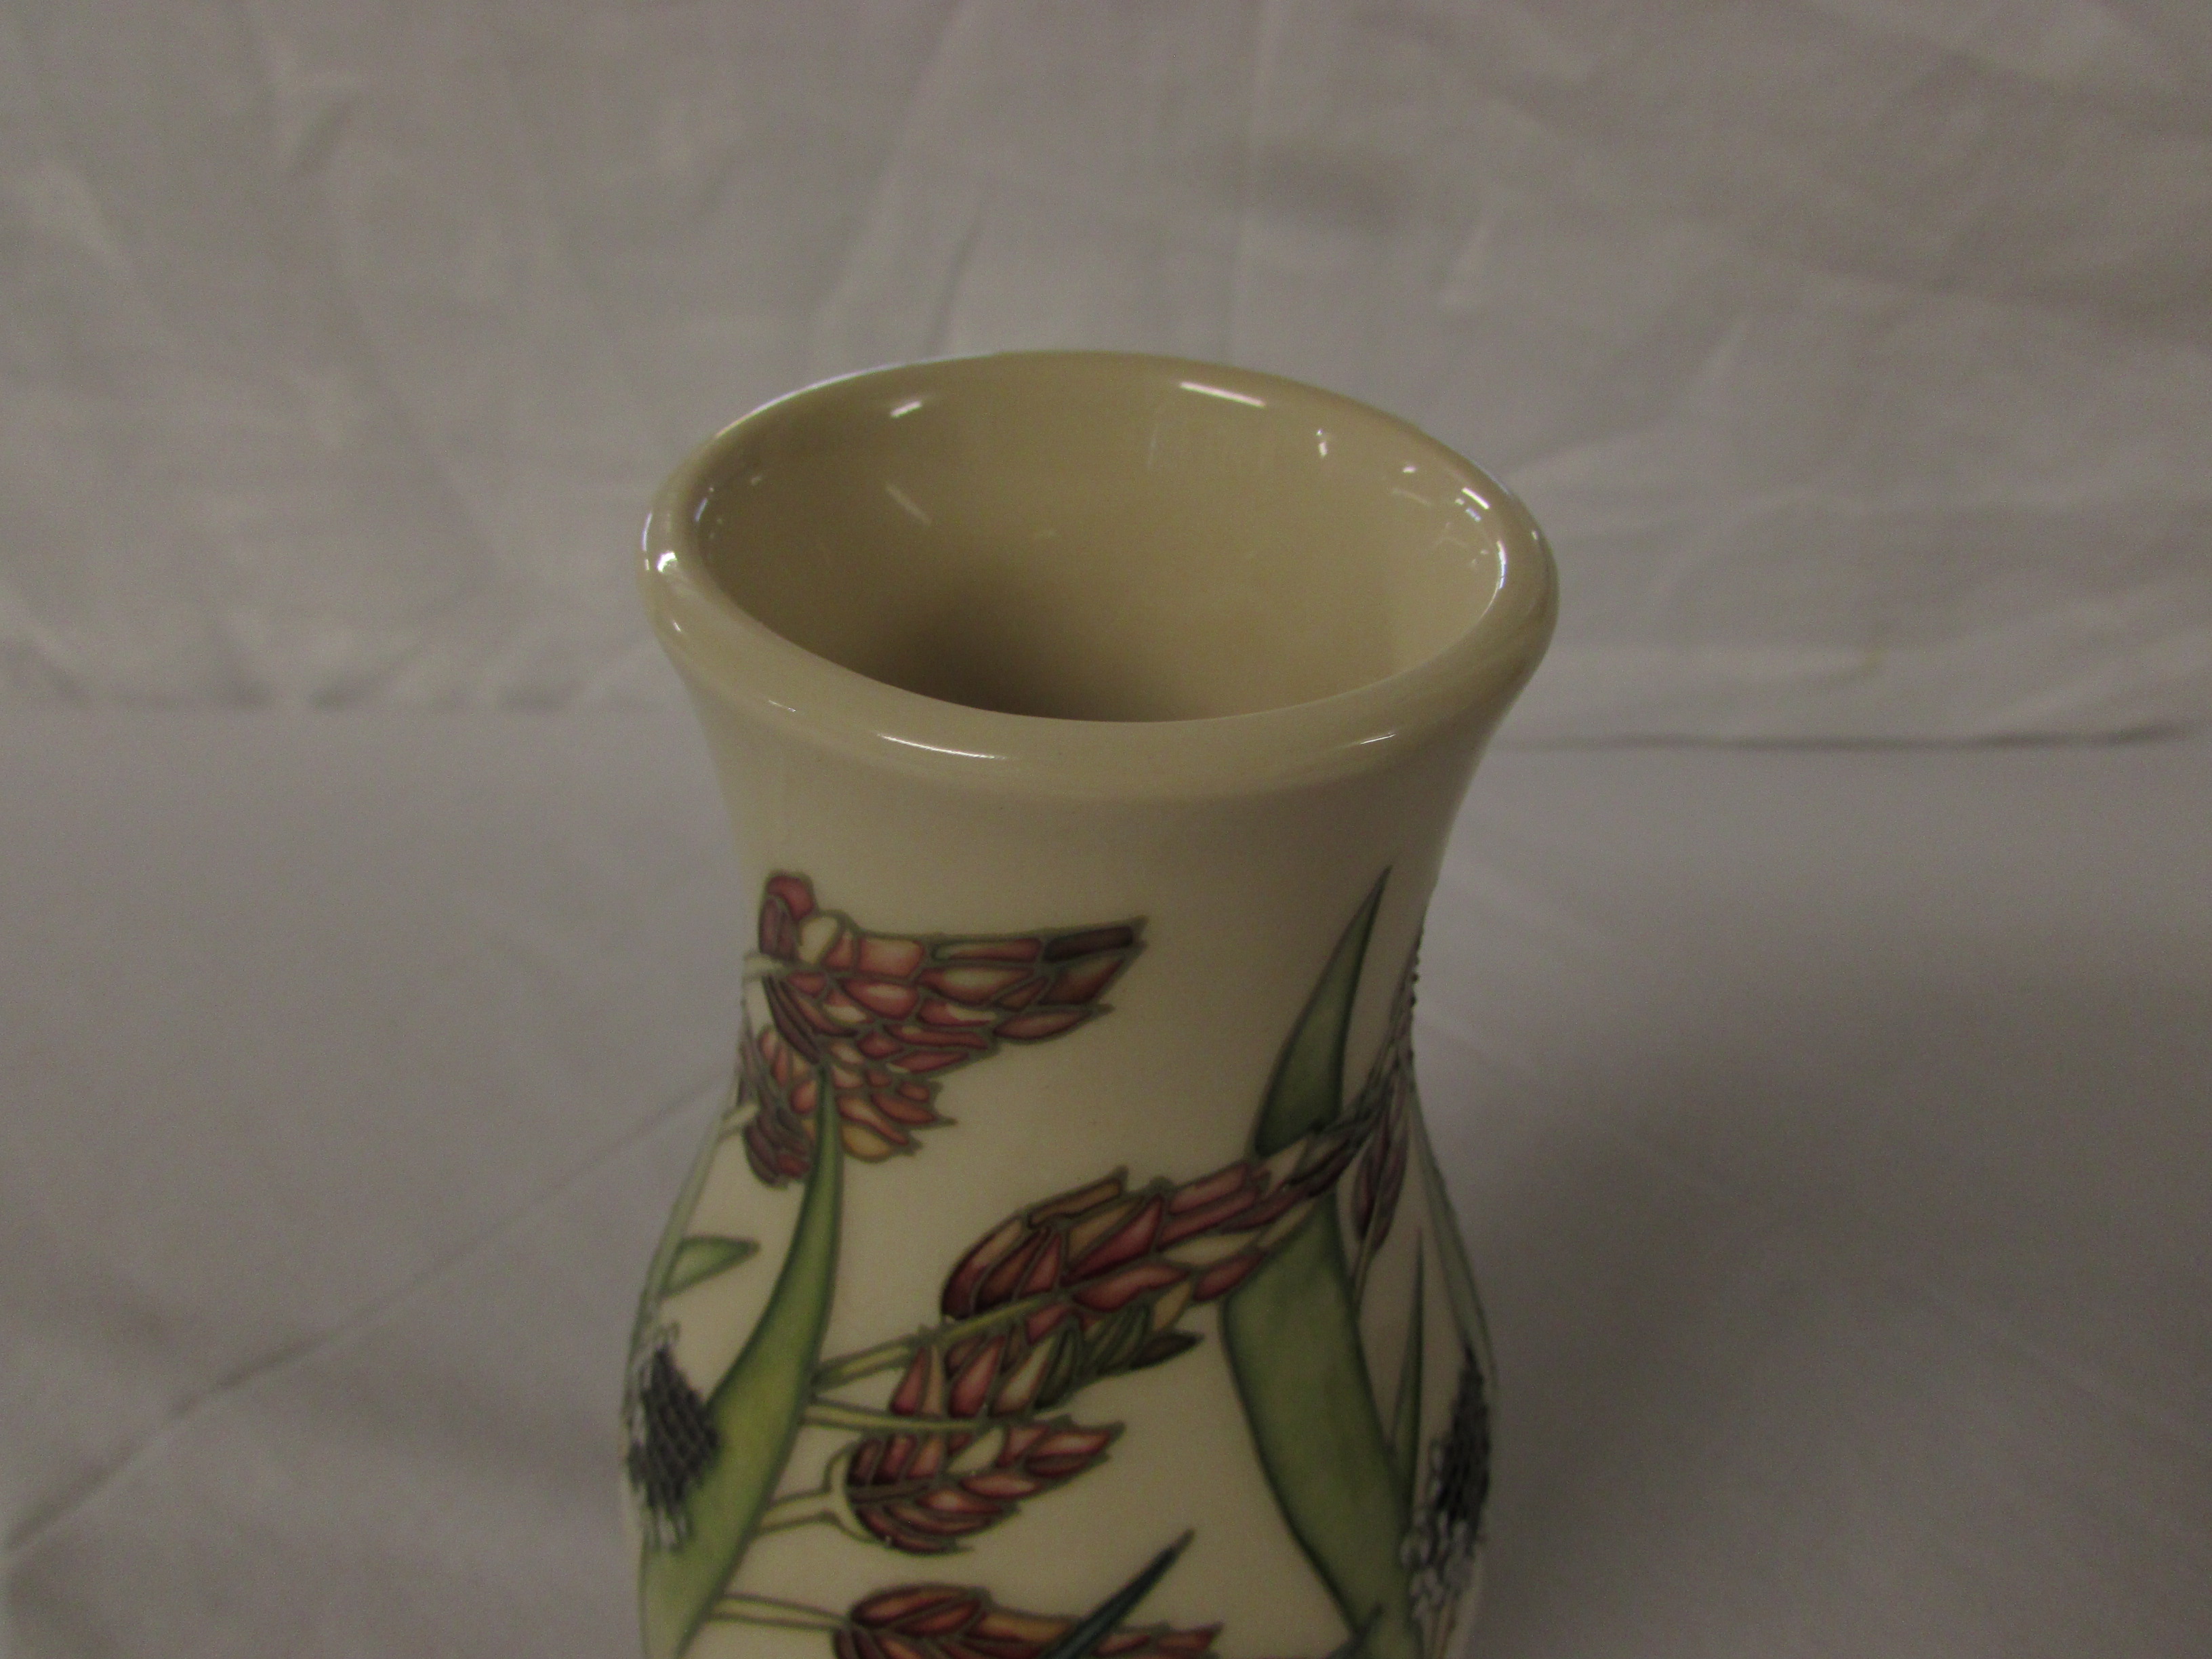 Moorcroft vase 120/9 'Savannah' pattern designed by Emma Bossons 2001, height 25cm, with box - Image 6 of 7